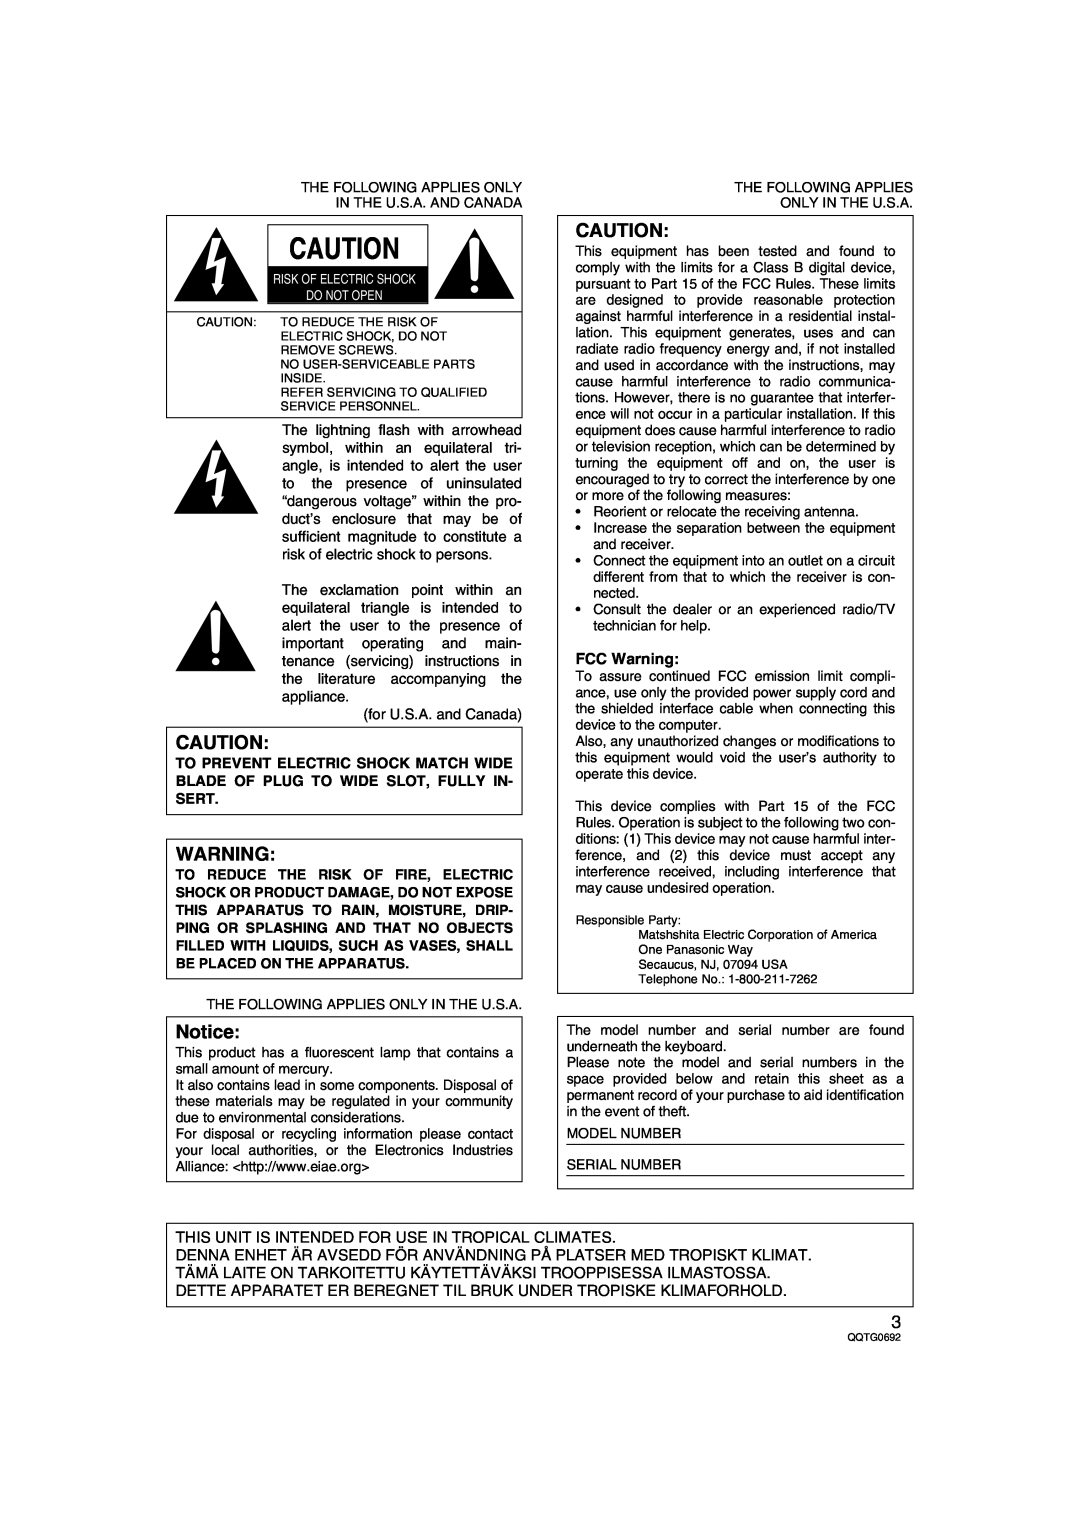 Panasonic SX-KN2400, SX-KN2600 manual FCC Warning, This Unit Is Intended For Use In Tropical Climates 